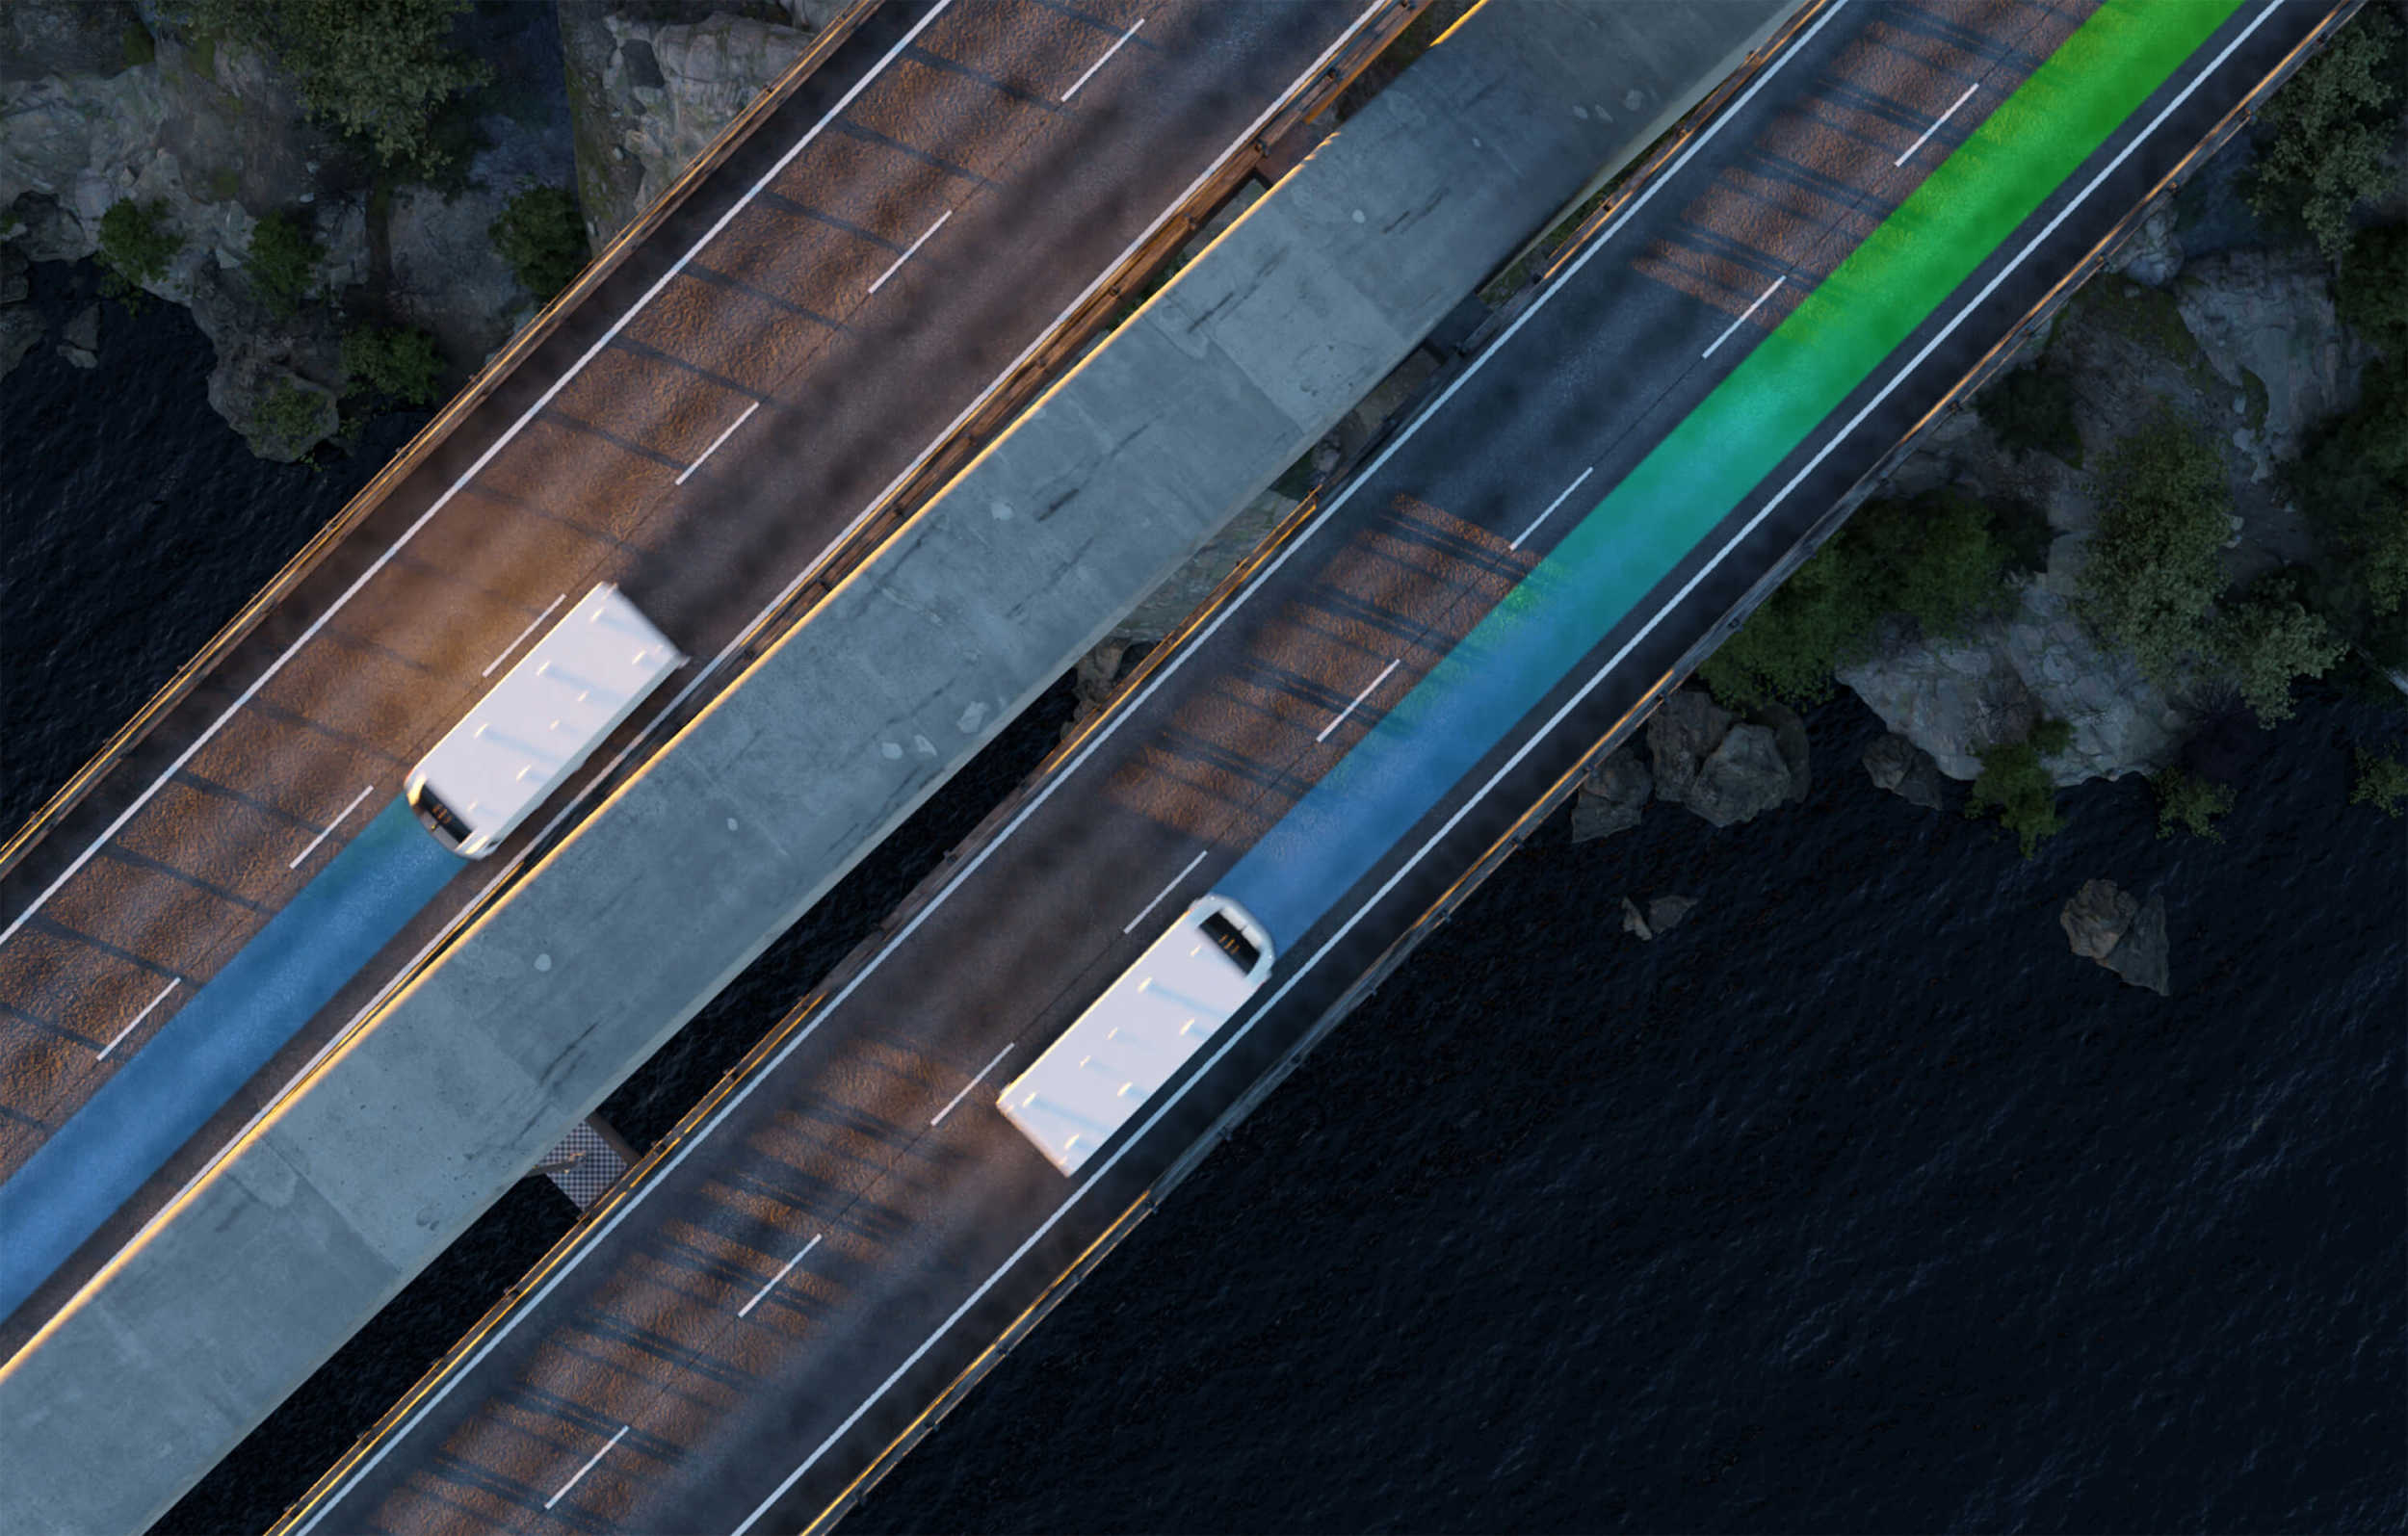 Two pods driving across the Svinesund bridge on the grid illustration